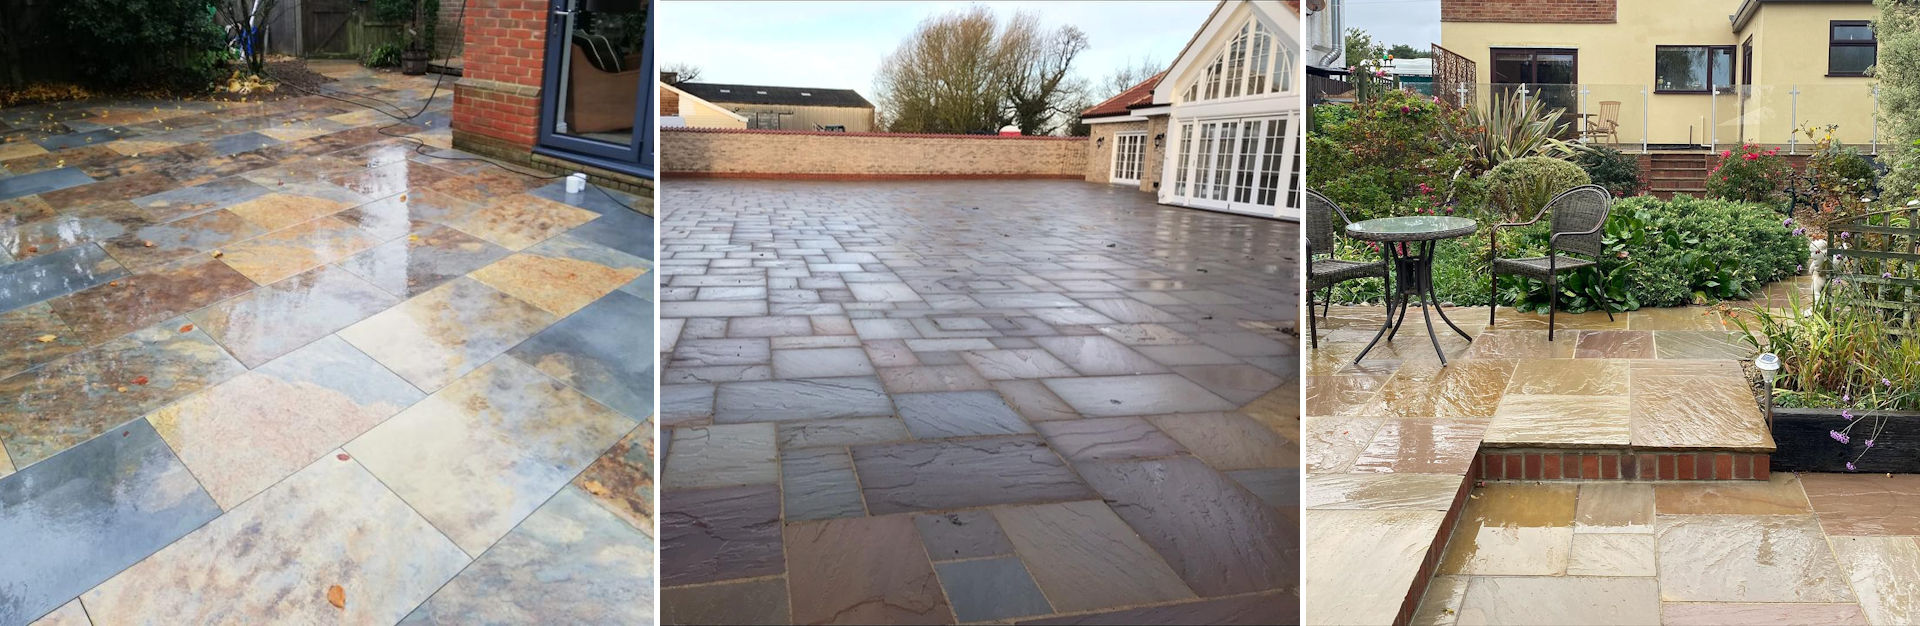 NS Hughes Developments - Paving, Patios and Decking